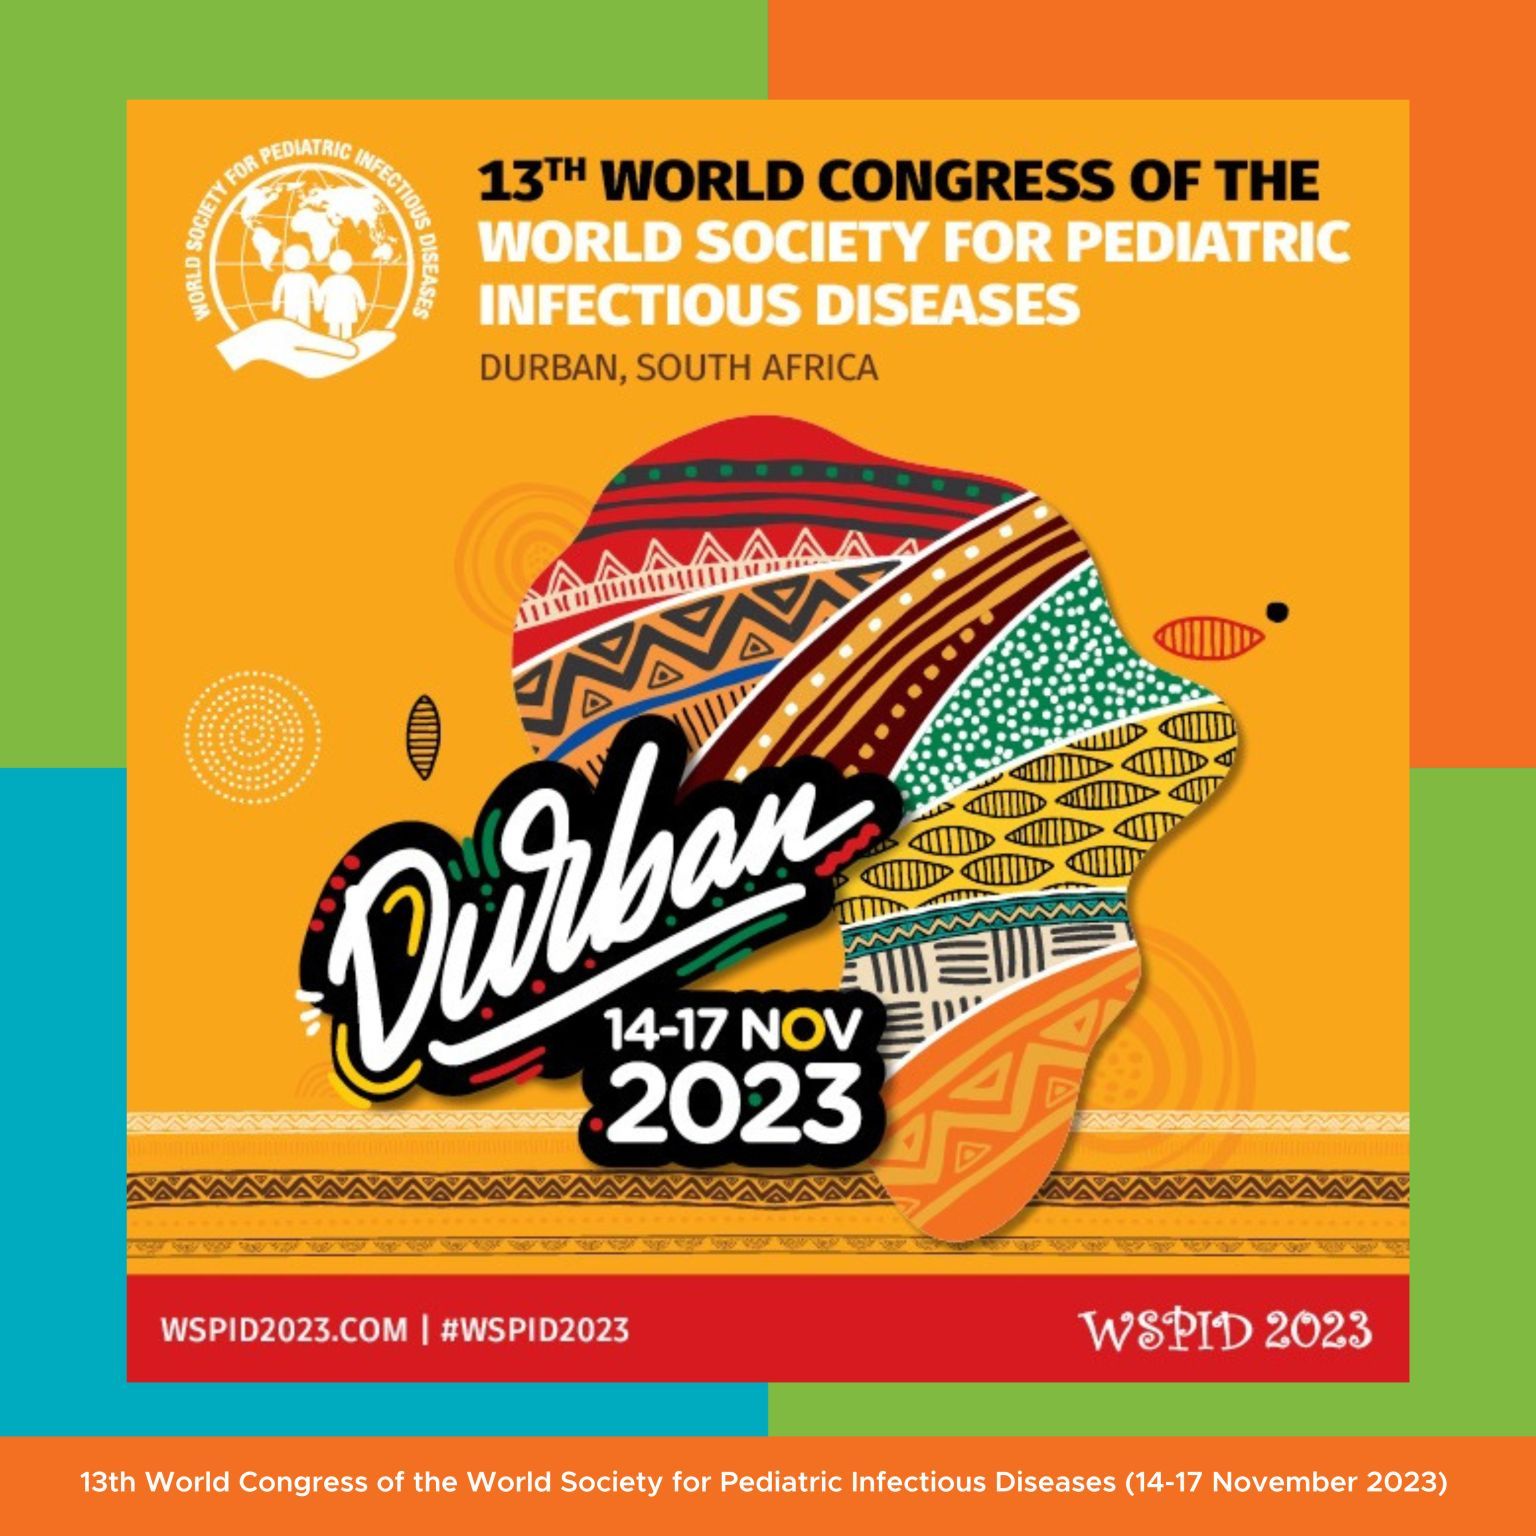 WORLD CONGRESS ON PEDIATRIC INFECTIOUS DISEASES TO BE HELD AT THE DURBAN ICC